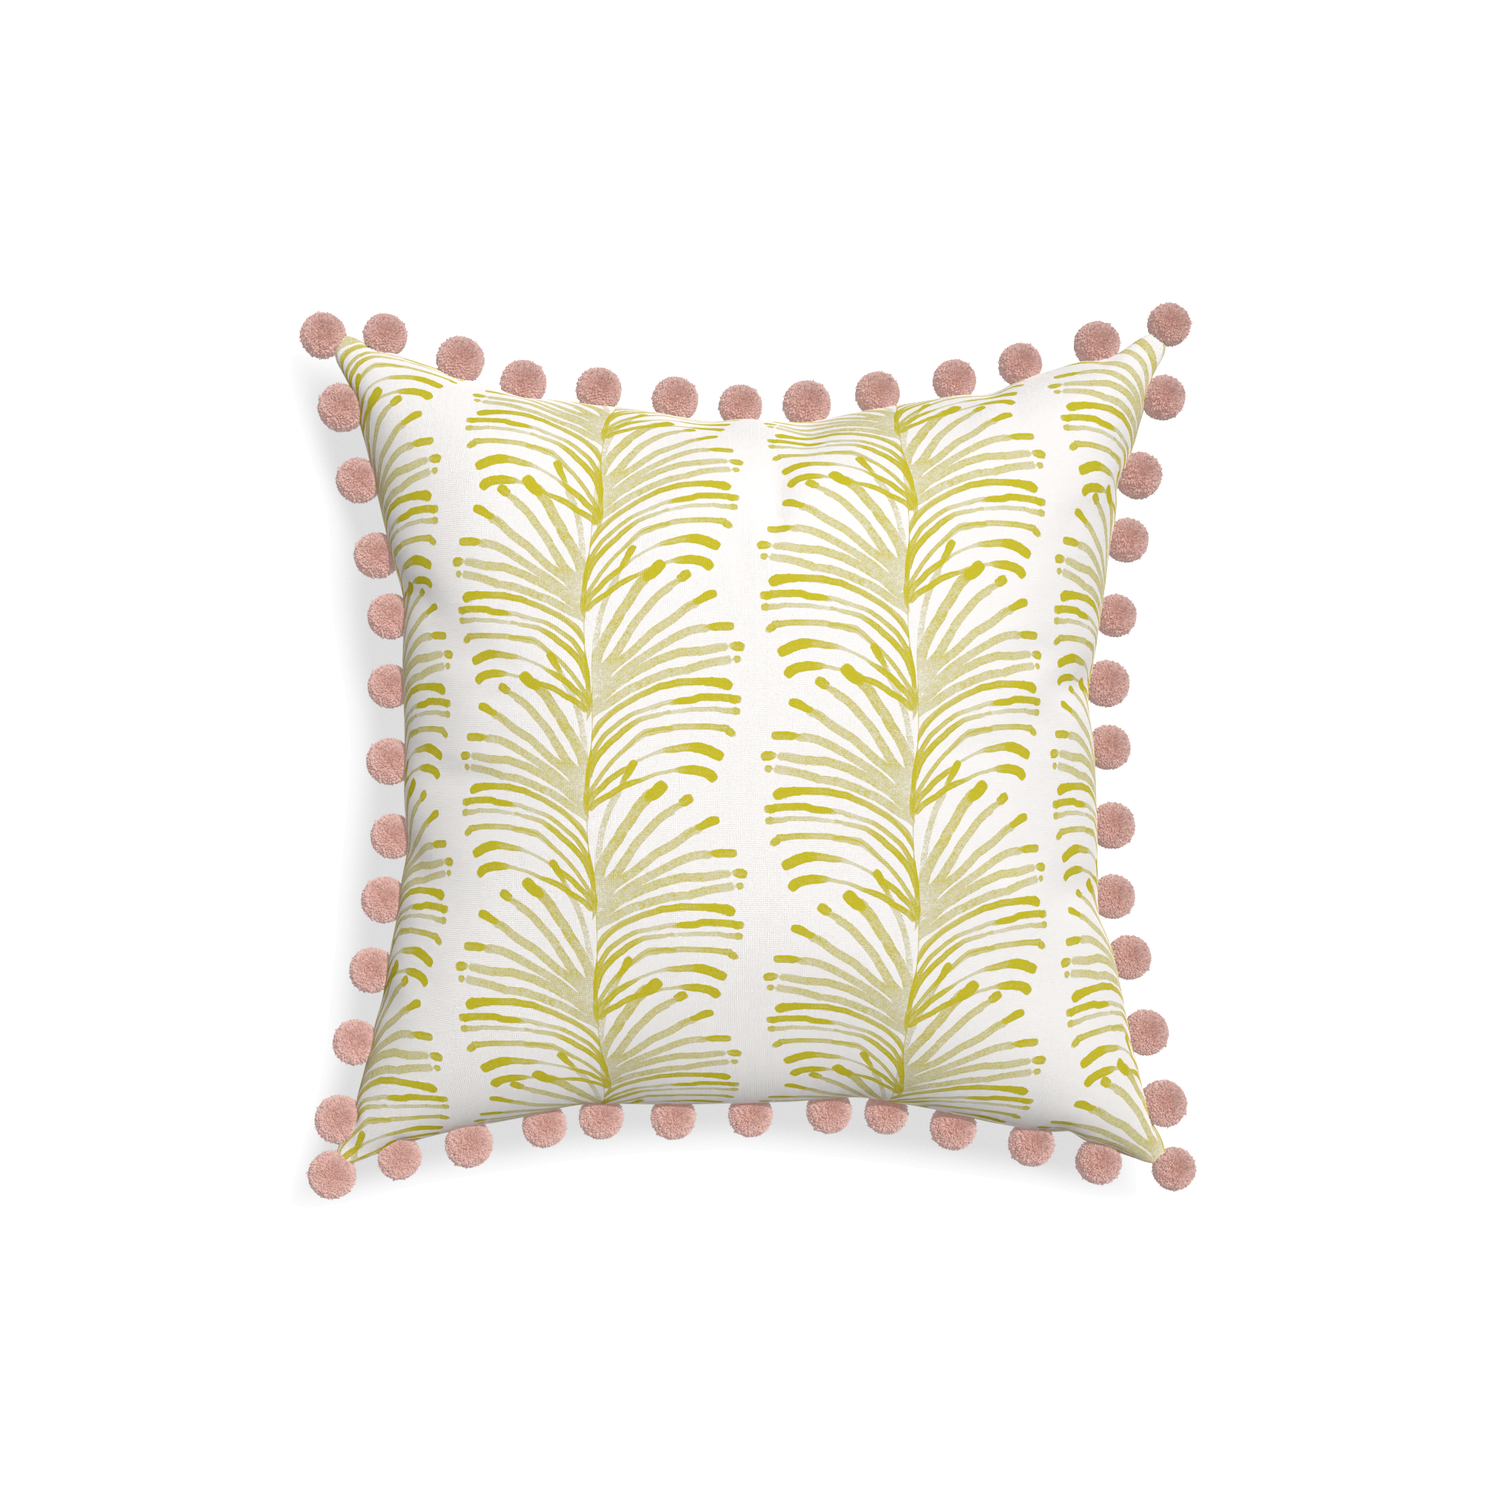 18-square emma chartreuse custom yellow stripe chartreusepillow with rose pom pom on white background